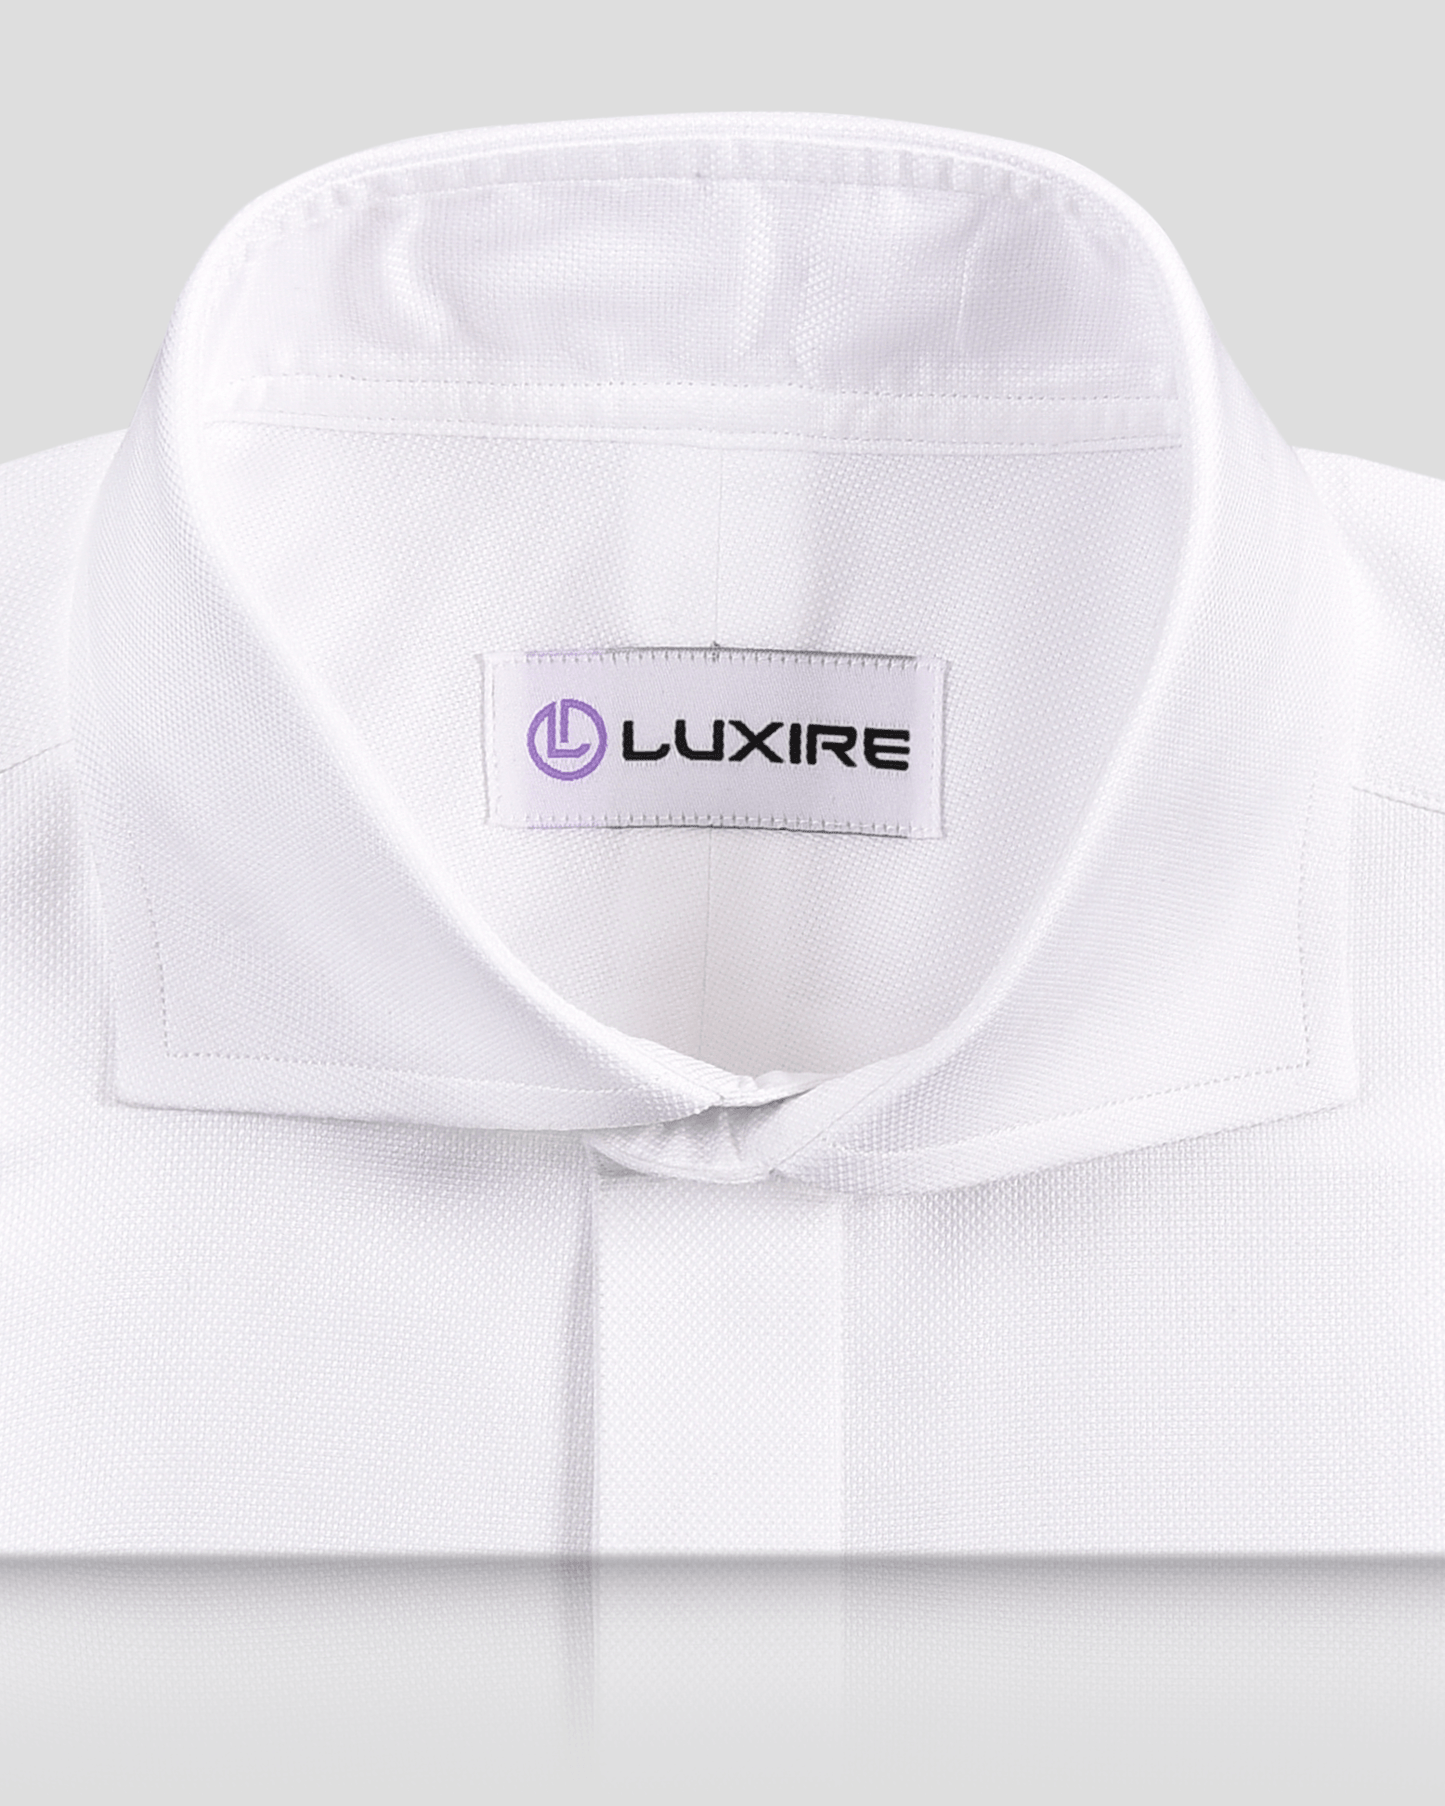 Collar of the custom oxford shirt for men by Luxire in white royal